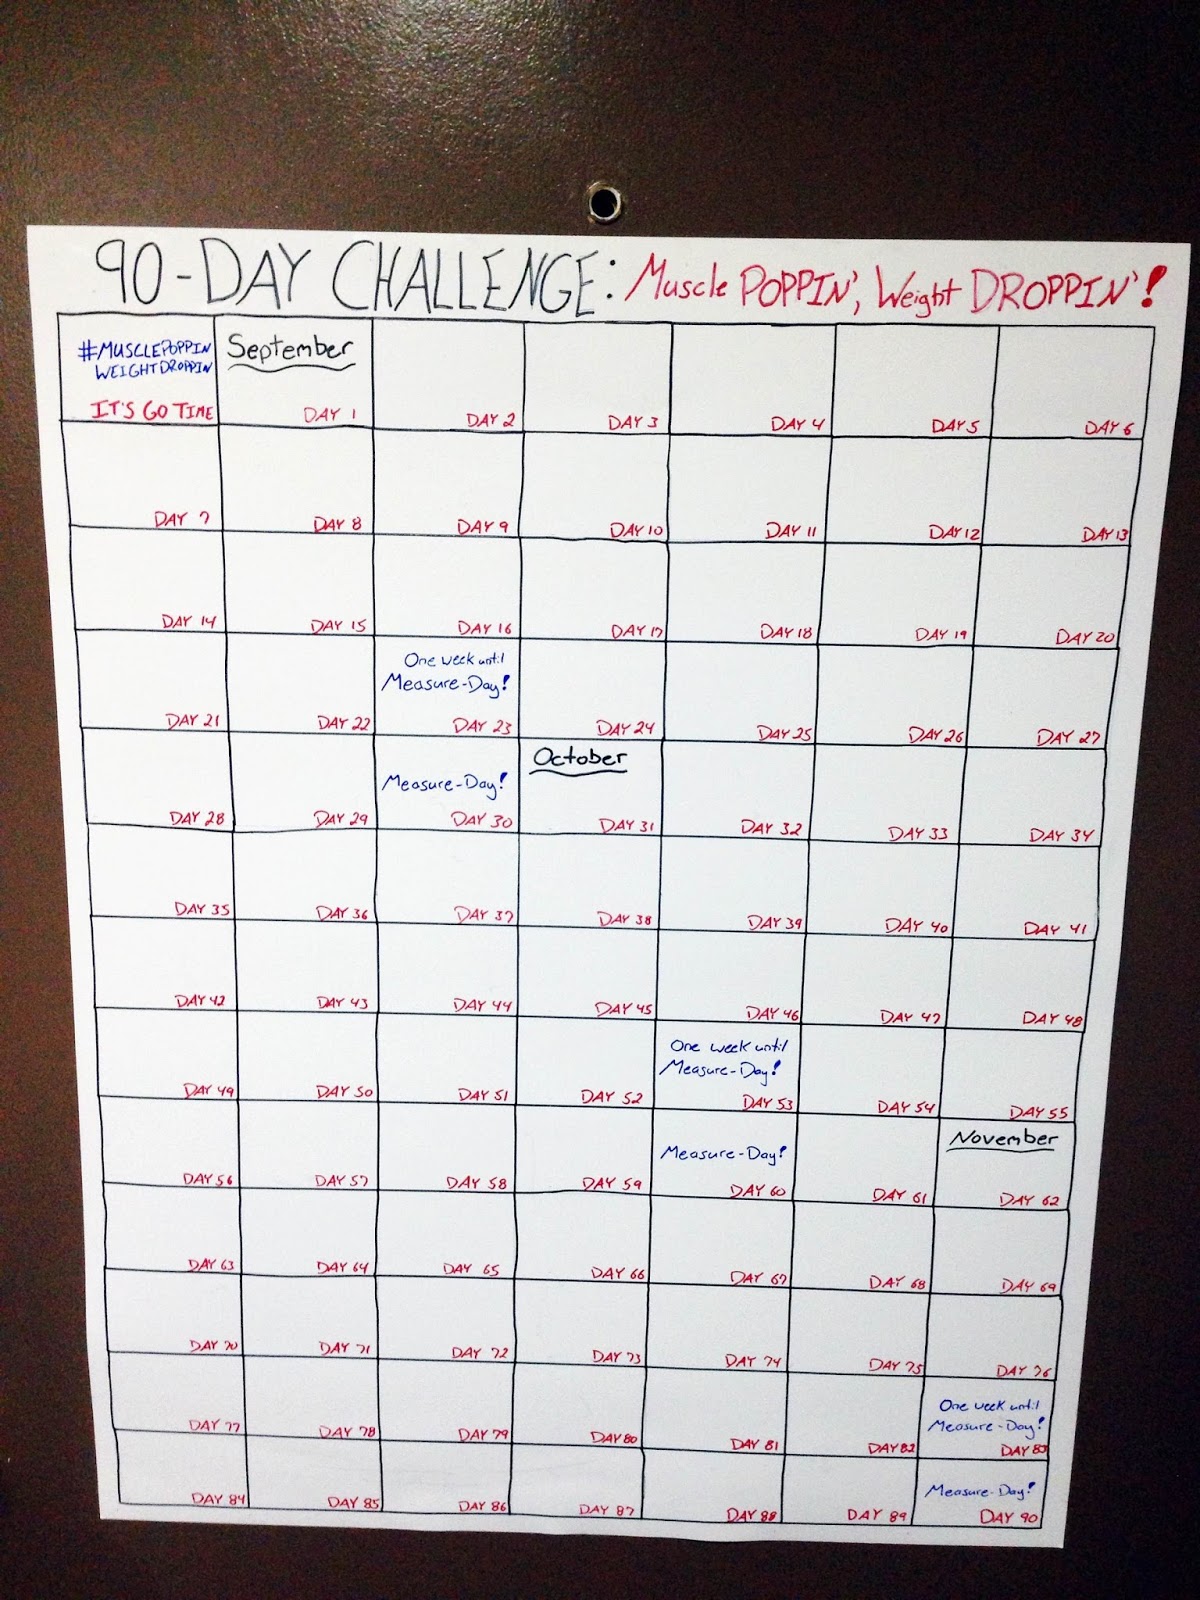 Cause You Gotta Have Faith 90 Day Challenge Muscle Poppin